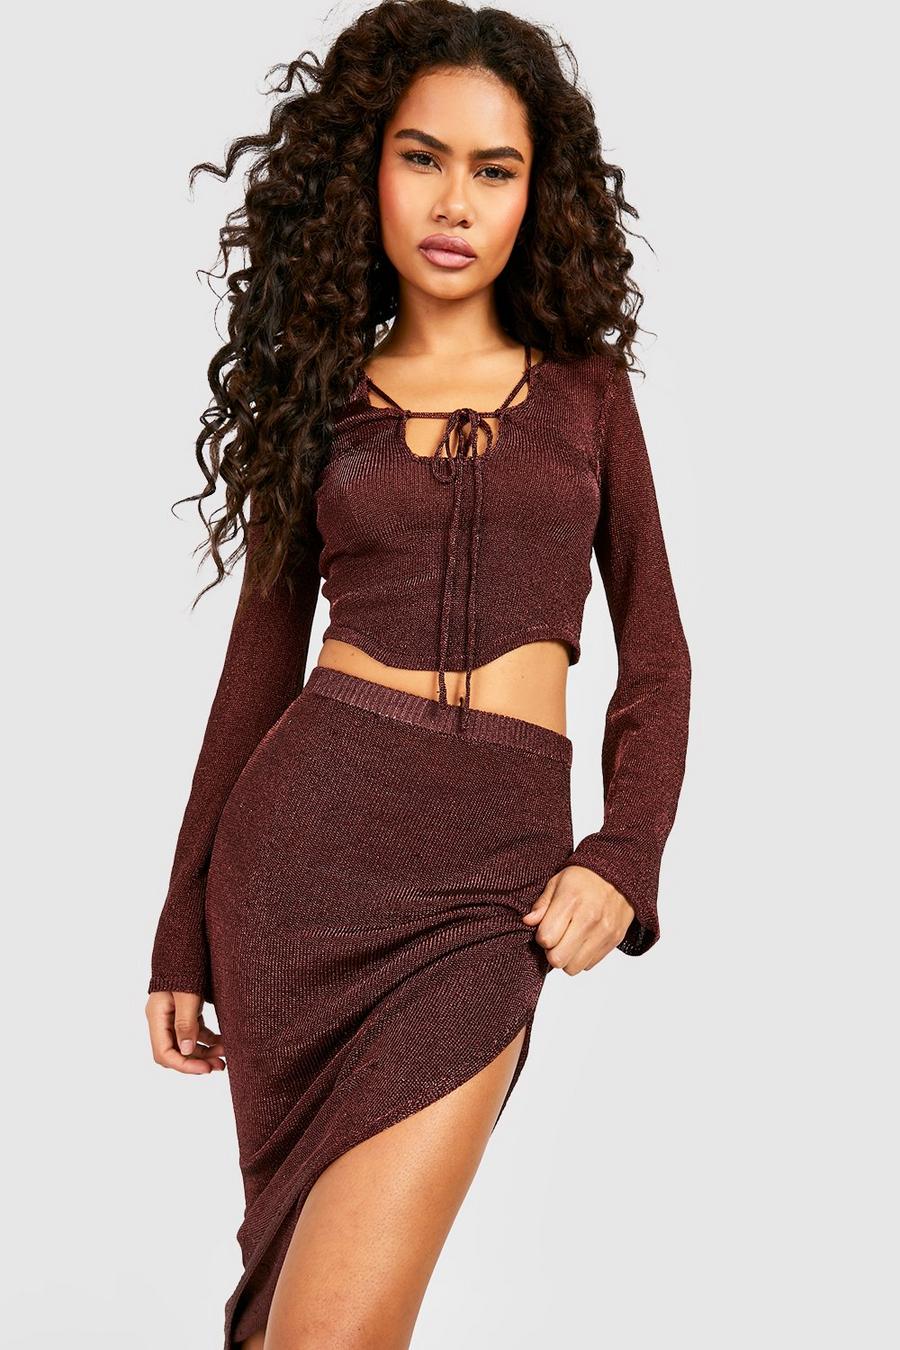 Chocolate Metallic Knitted Lace Up Corset Top And Asymmetric Skirt Set